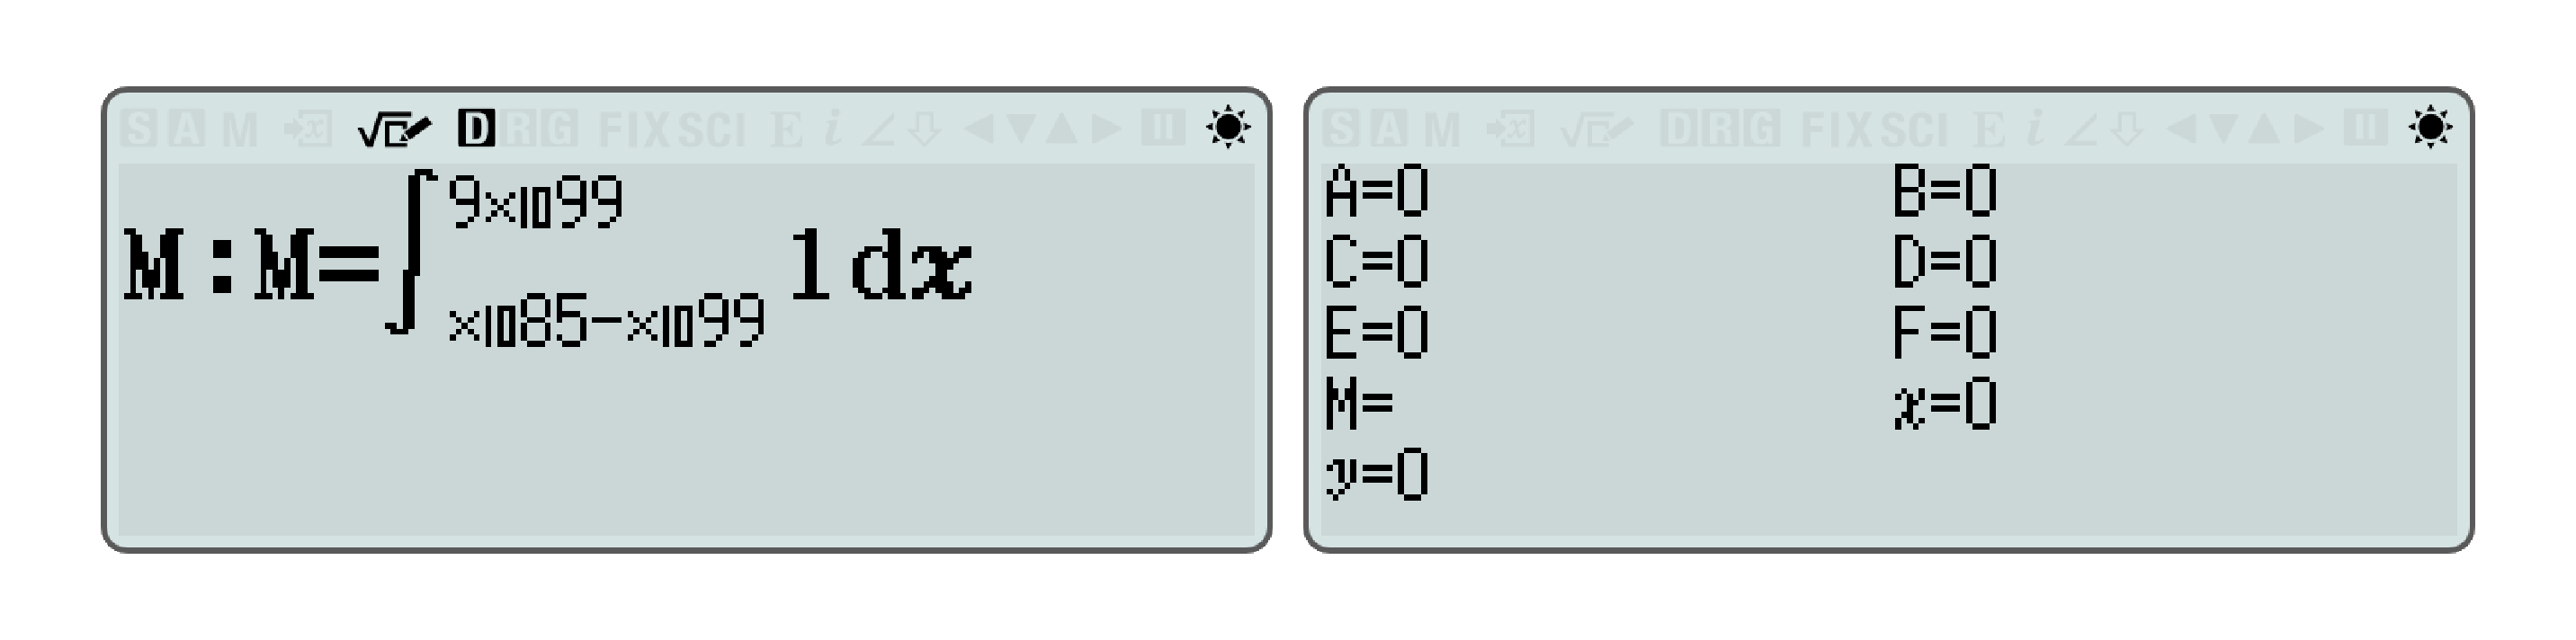 2 Casio CW I calculator screen captures. One is showing the equation M:M=Integral(1, ×10^85-*10^99, 9×10^99), the other shows the variable menu with an empty value in M.